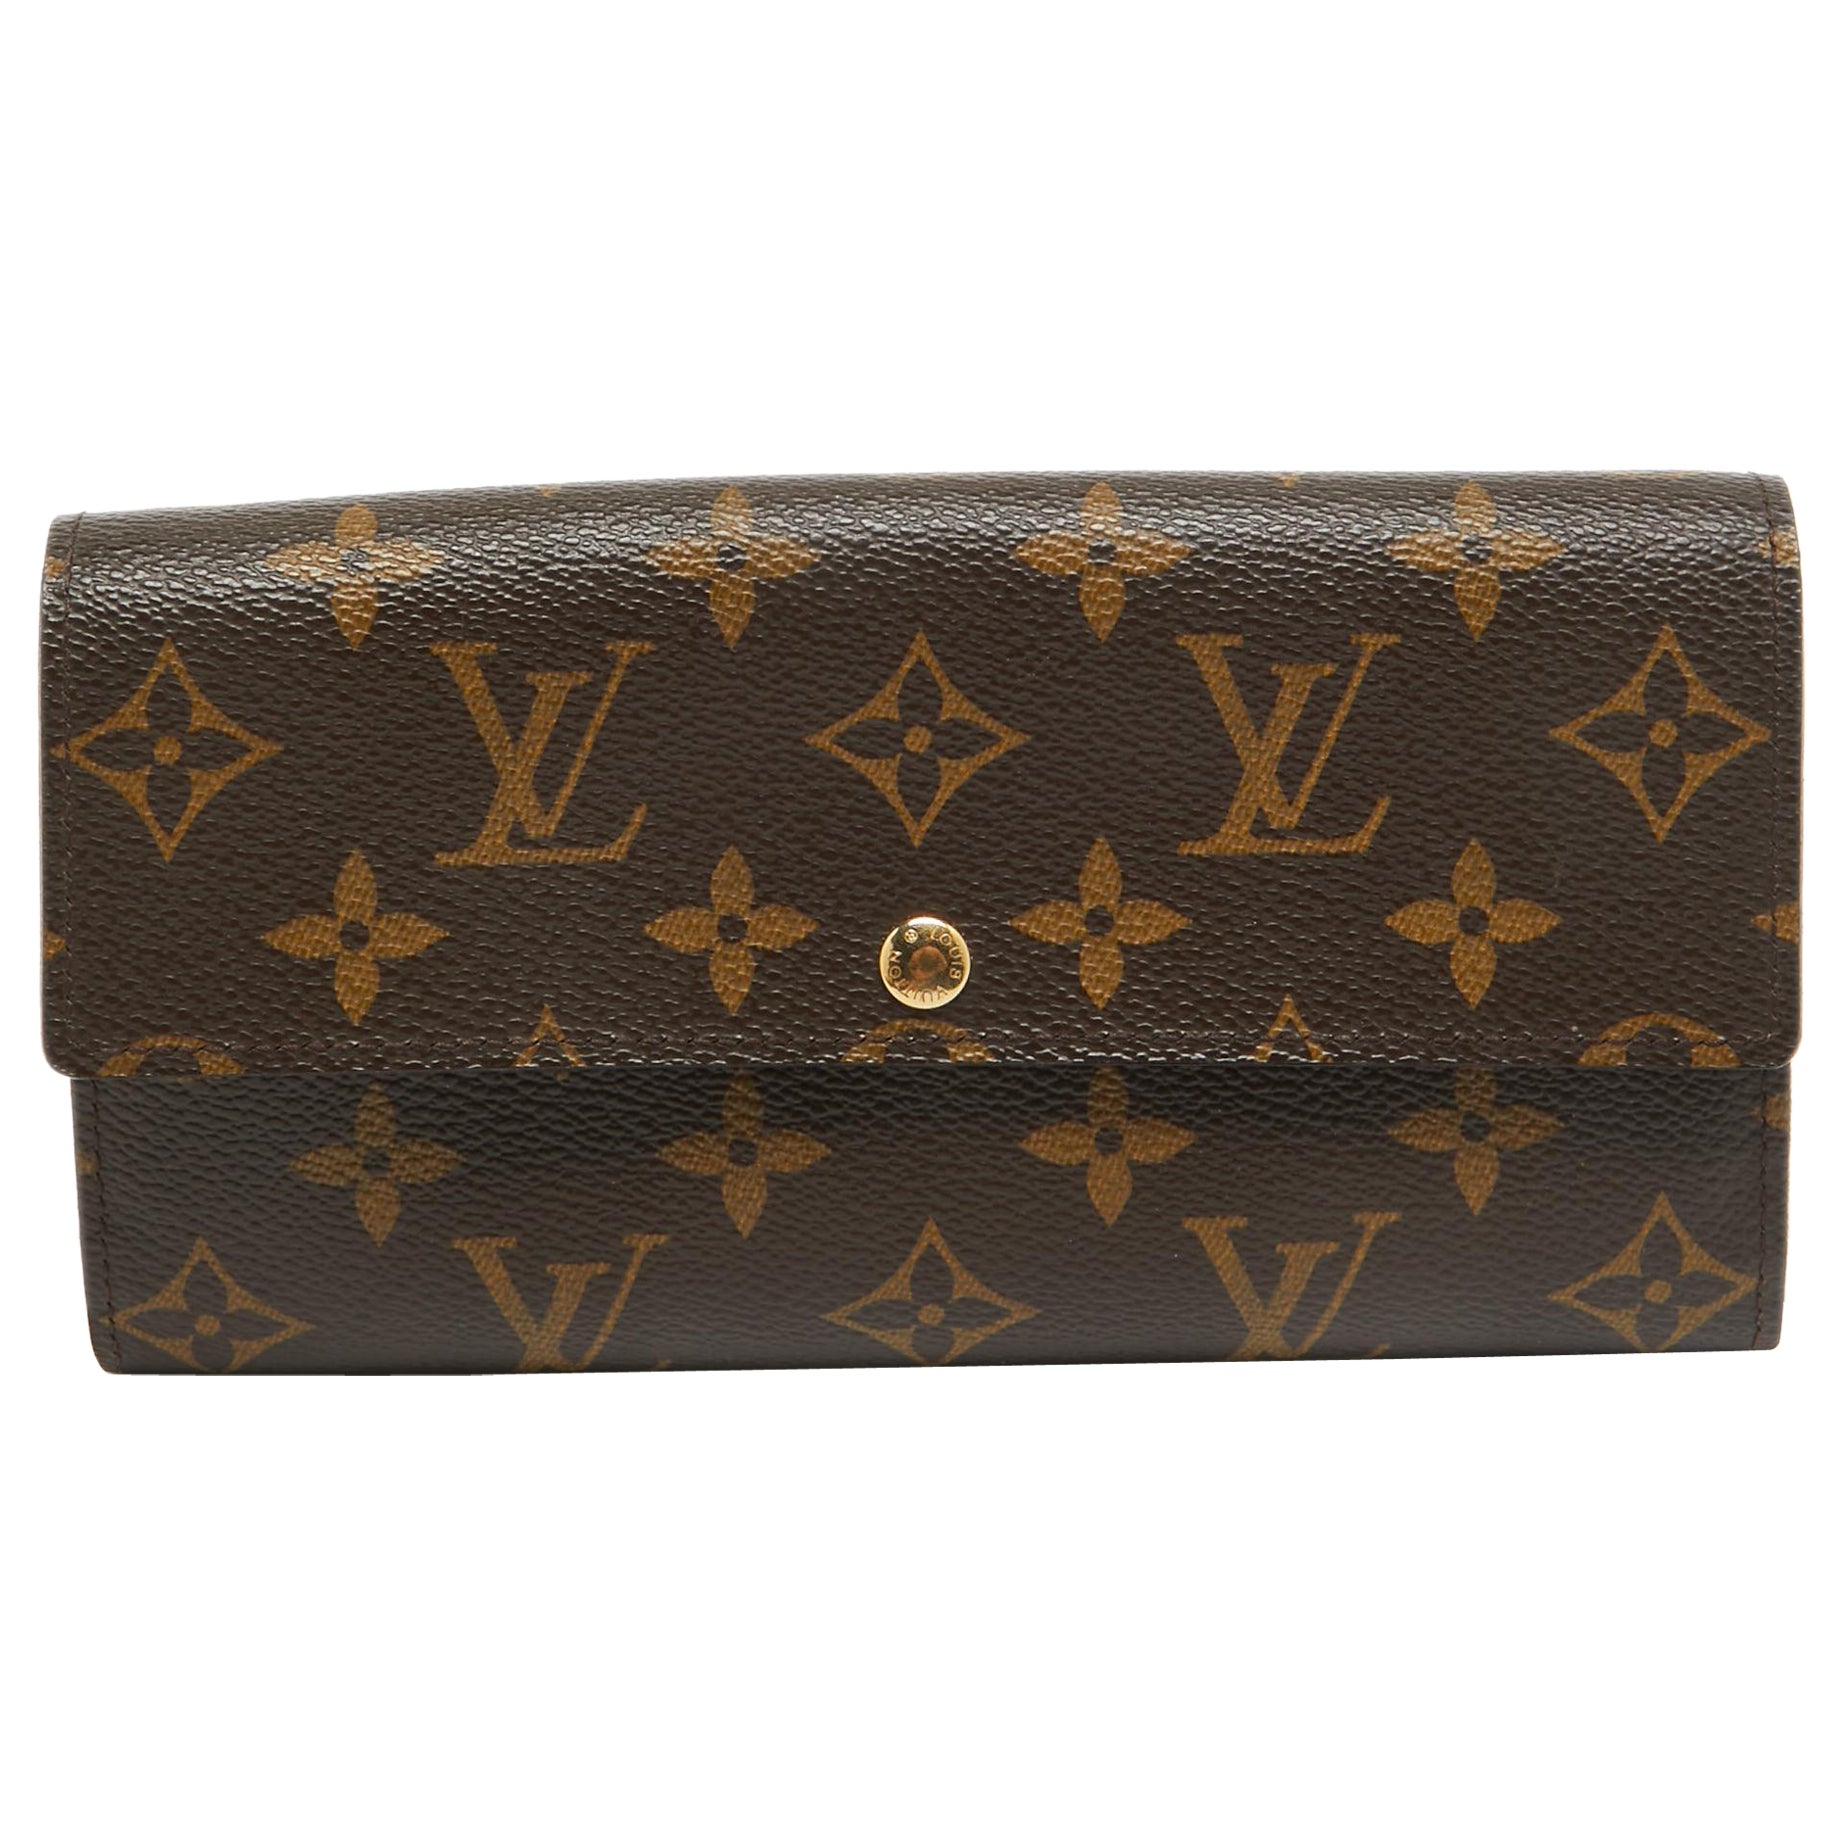 Are Louis Vuitton wallets RFLD protected?